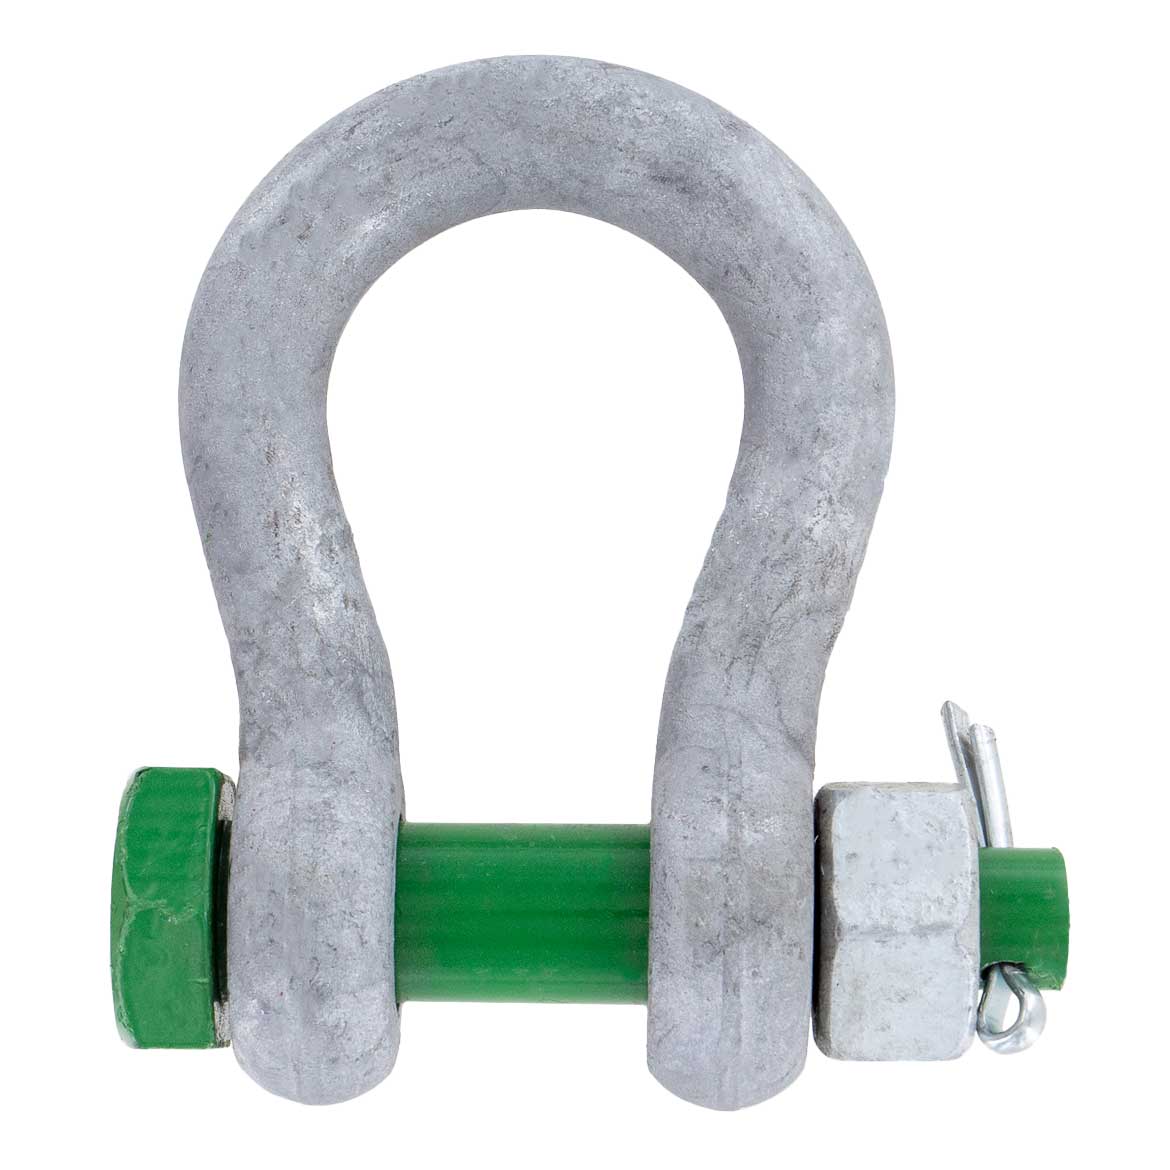 1/2" Van Beest Green Pin® Bolt Type Anchor Shackle | G-4163 - 2 Ton primary image